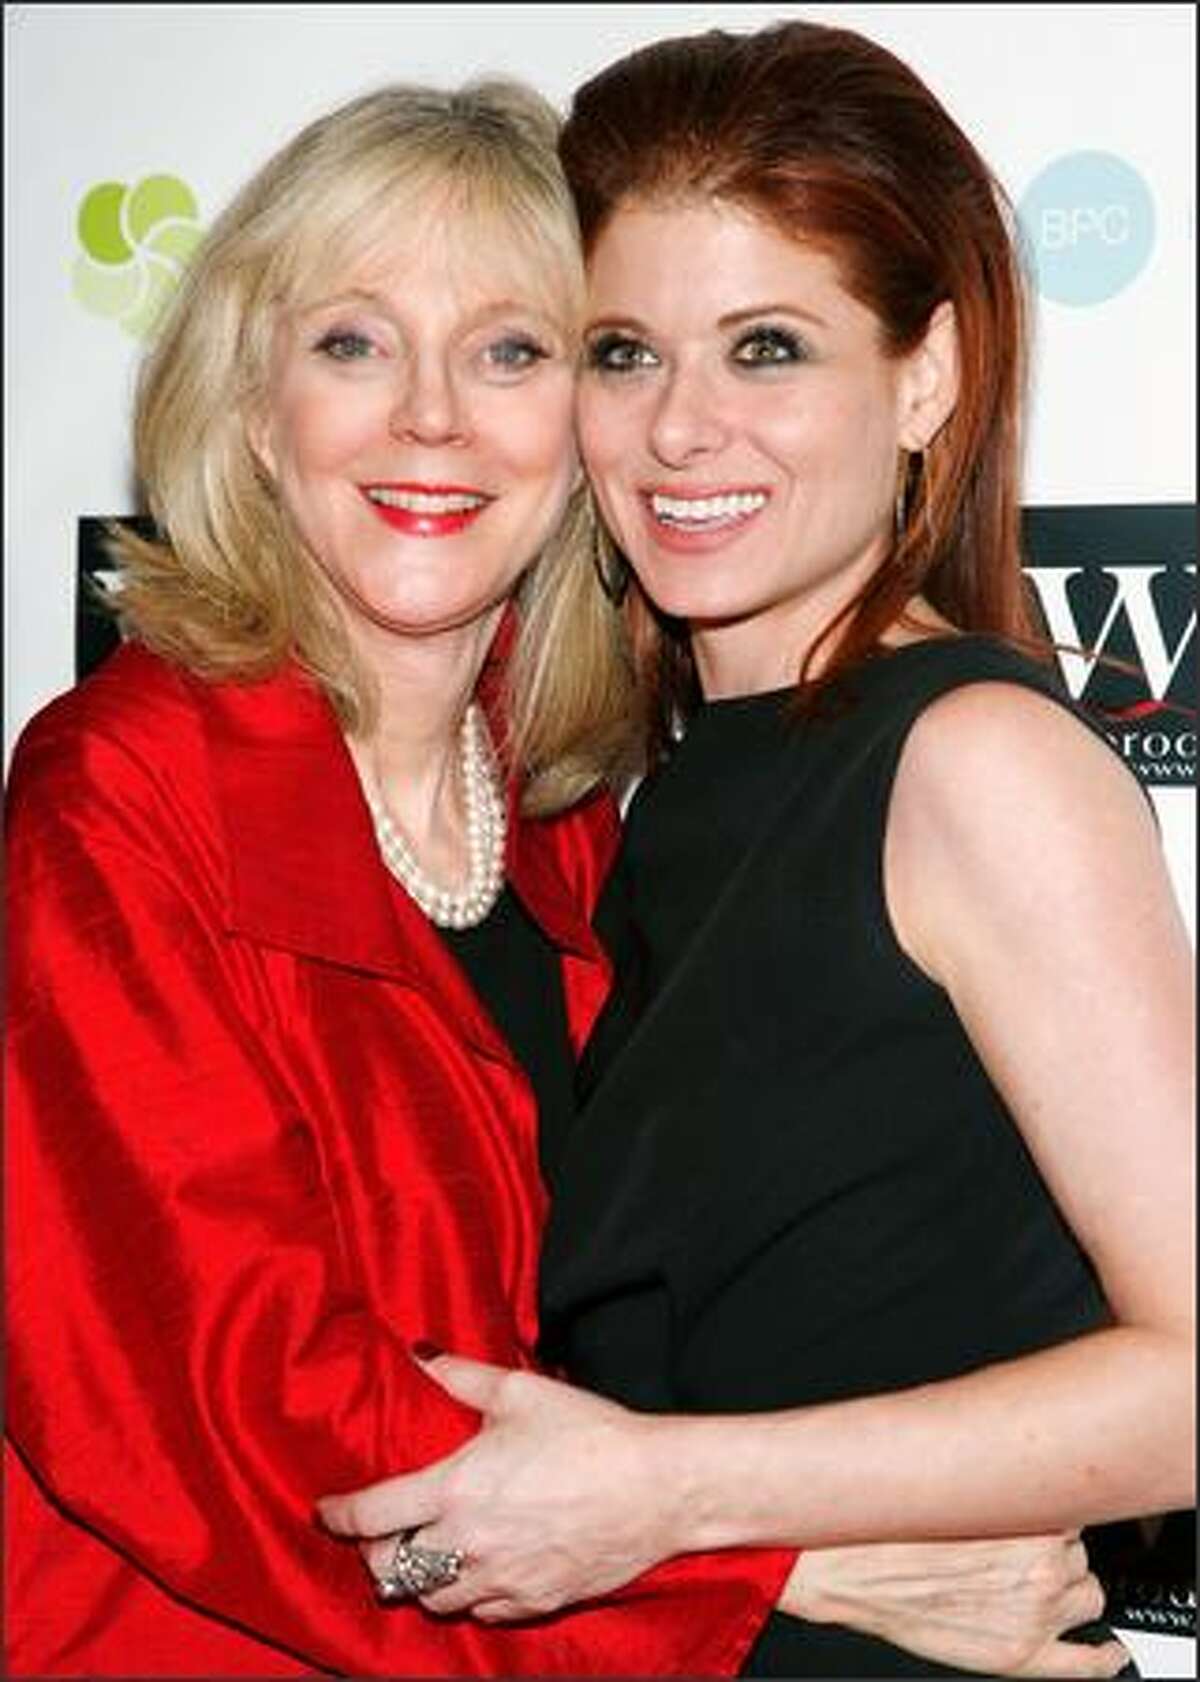 Actresses Blythe Danner (L) and Debra Messing (R) attend the LOVE benefit to support WET's 10th season at the Angel Orensanz Foundation in New York City.